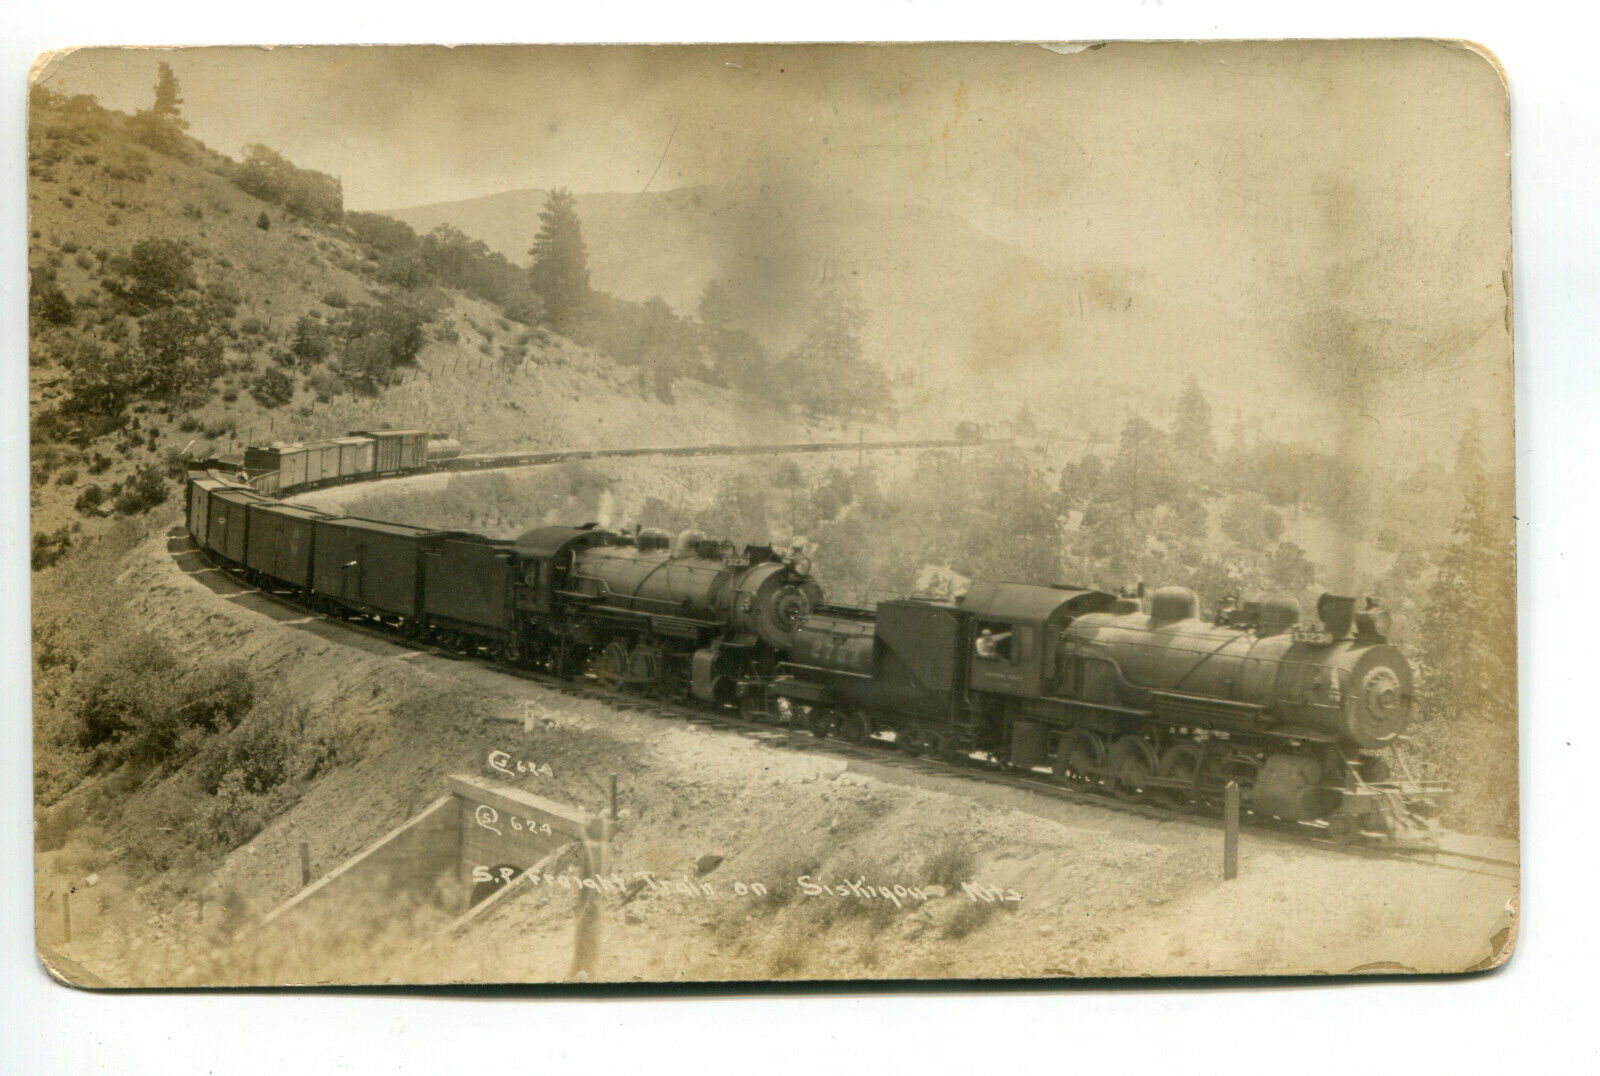 Southern Pacific Freight Train on Siskiyuo Mountains, Oregon, 1914, RPPC